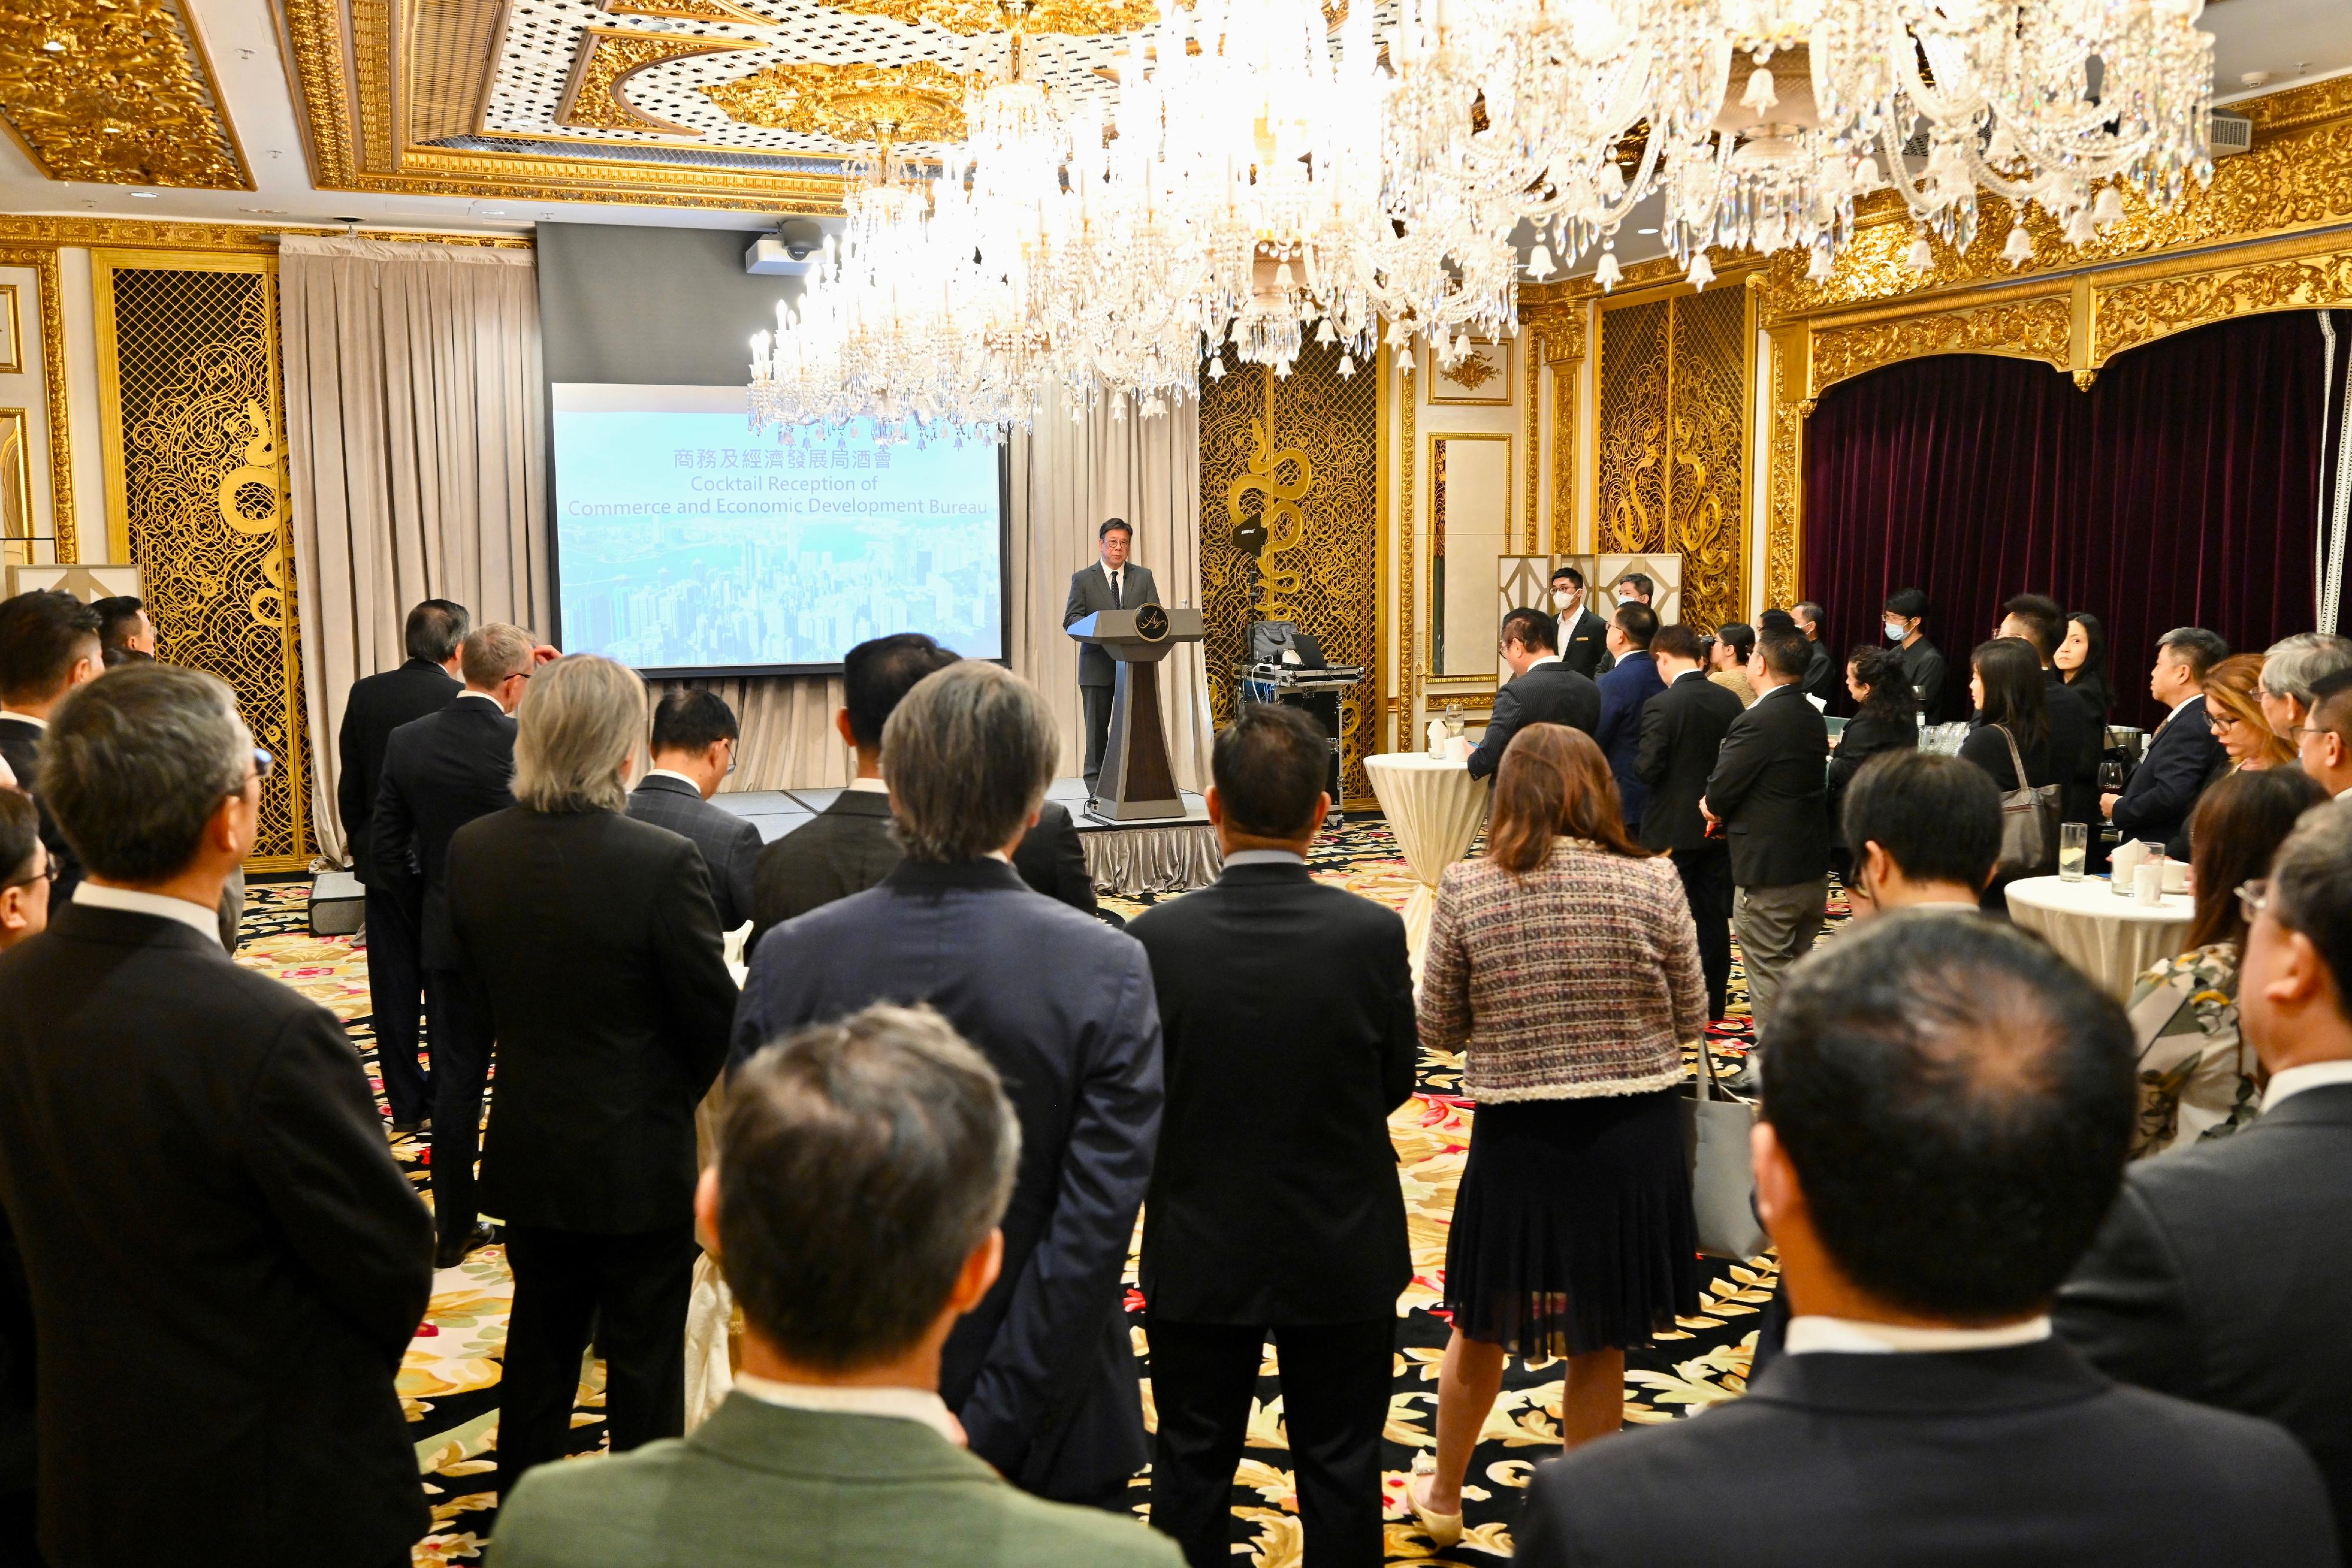 The Secretary for Commerce and Economic Development, Mr Algernon Yau, today (June 27) hosted a cocktail reception for representatives of local and foreign chambers of commerce to review the work of the current-term Government in promoting trade and economic developments, and exchange views on the work focus in the coming year. The guests attending the cocktail reception included the President of the Legislative Council (LegCo), Mr Andrew Leung, several LegCo Members and representatives from local and foreign chambers of commerce.